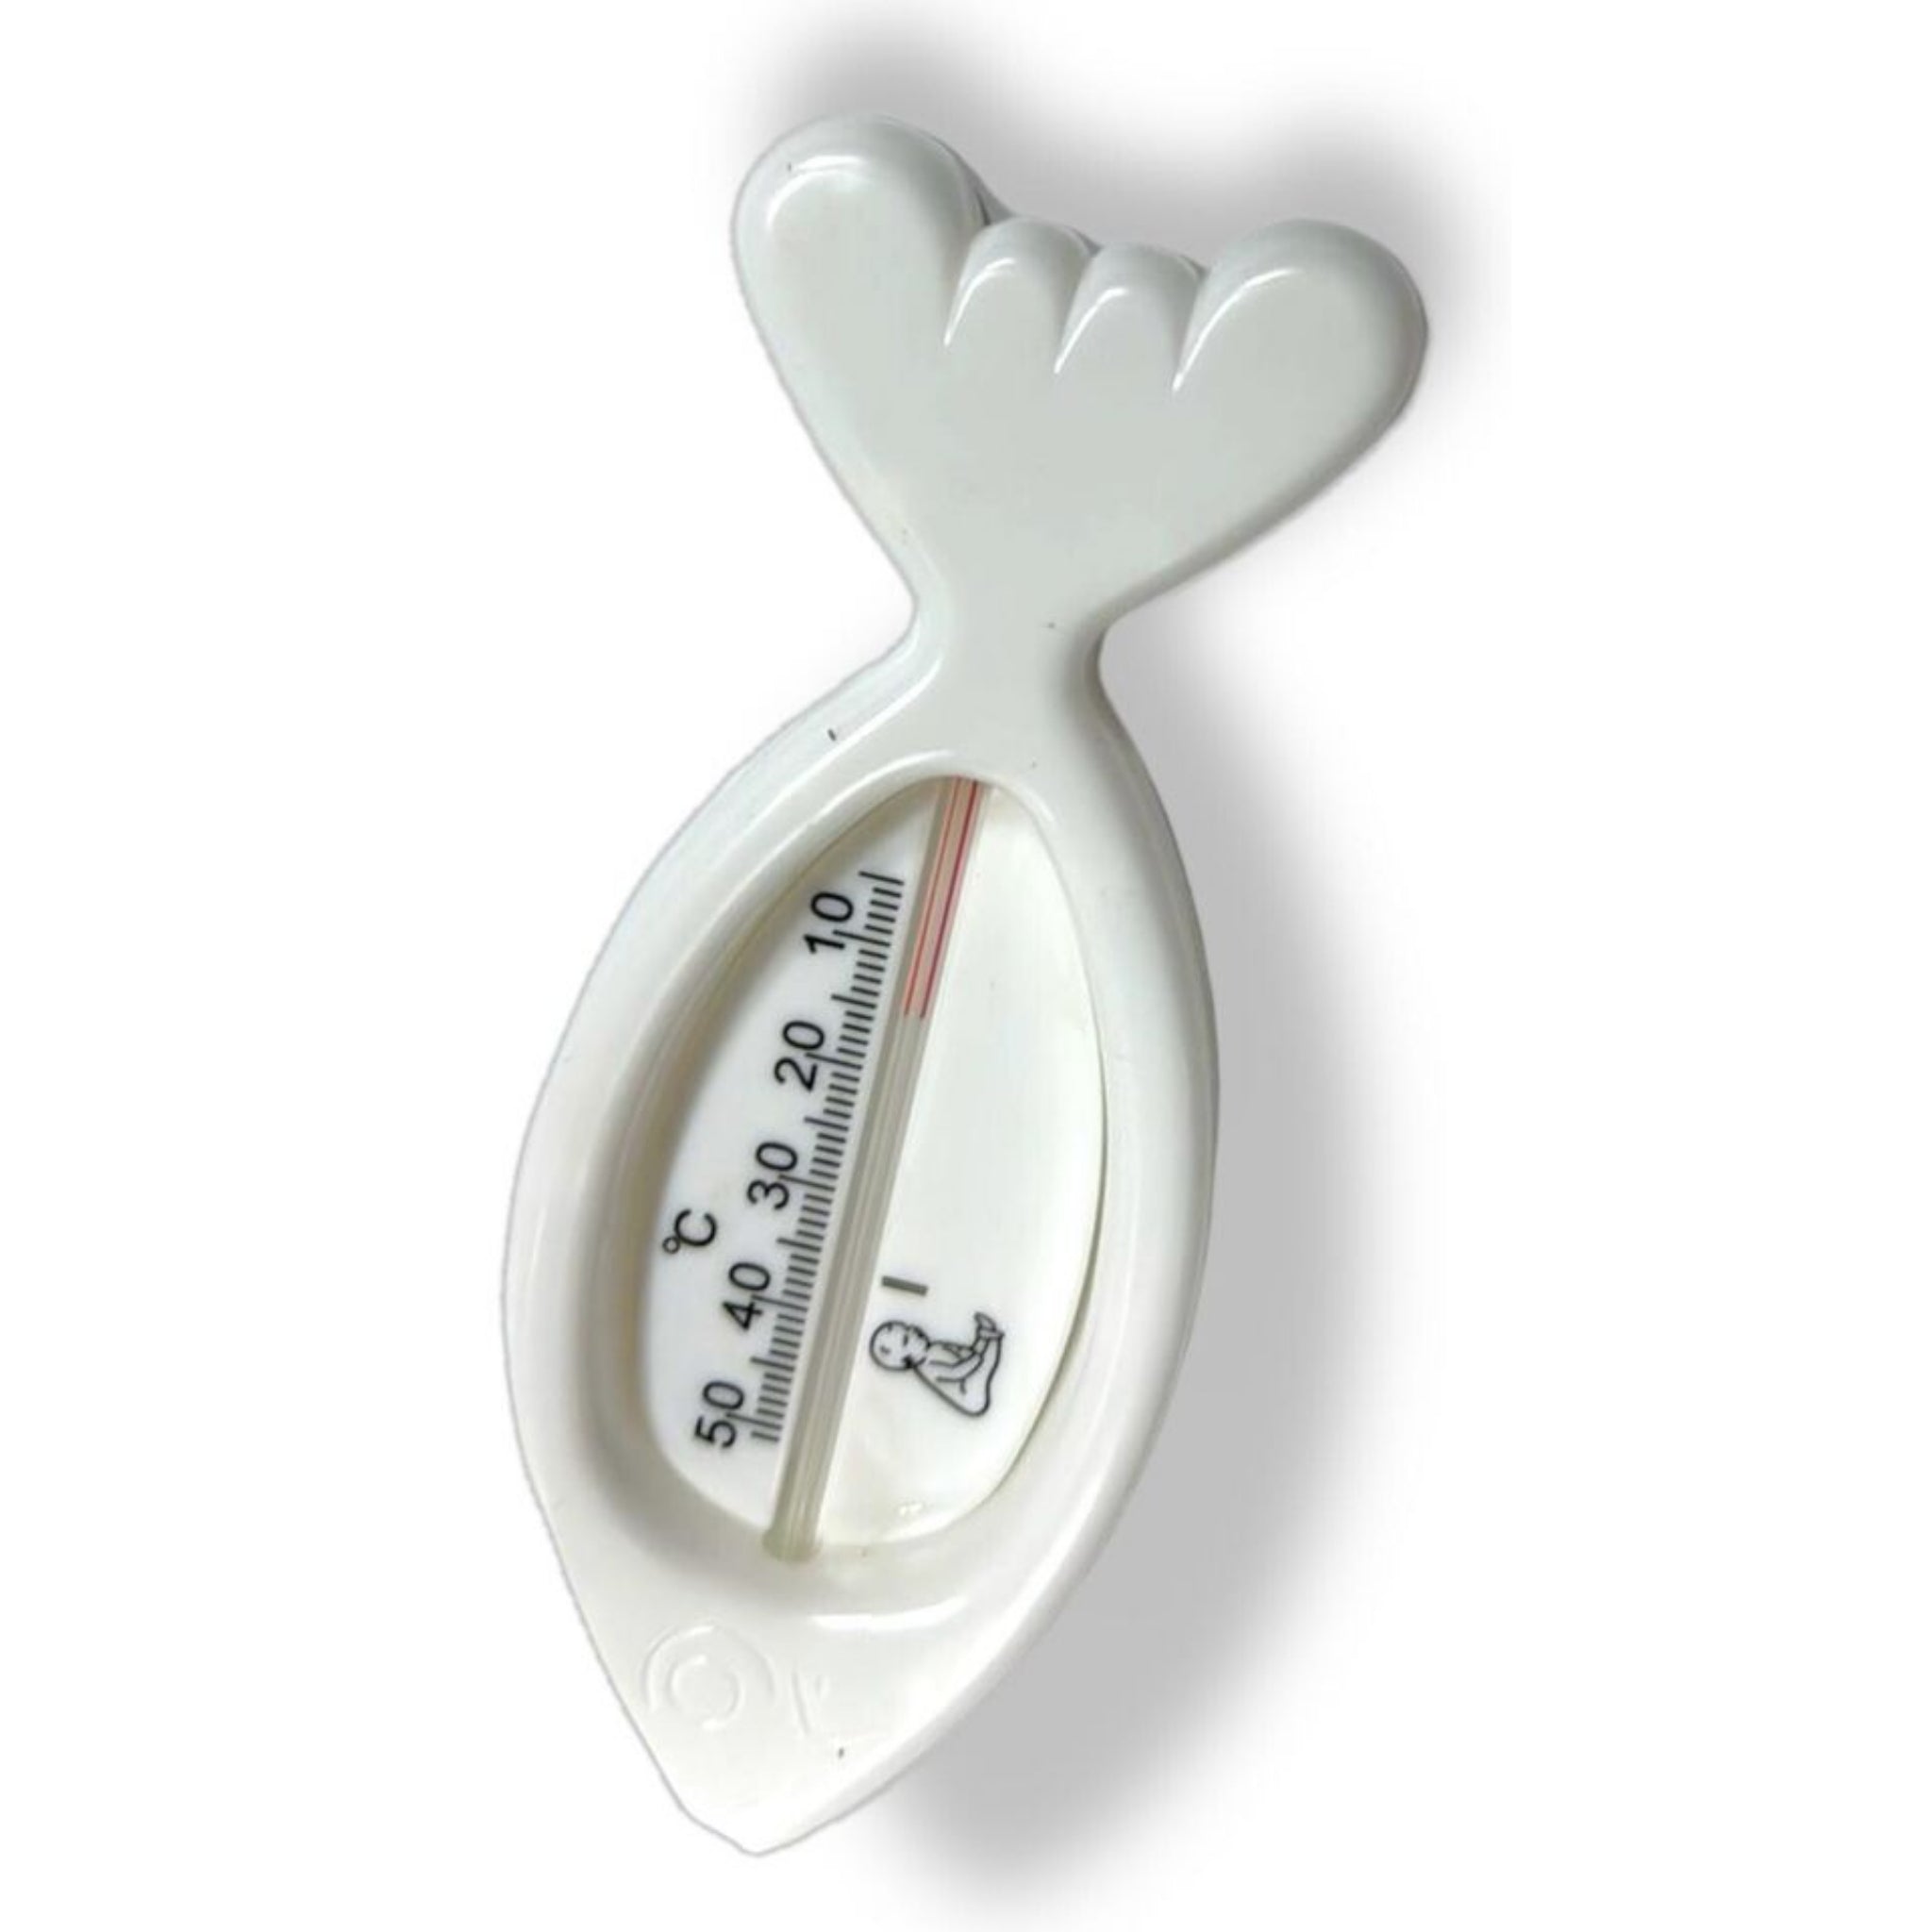 Beclen Harp 2 x Bath Thermometer Check Hot Cold Water Temp Ideal For New Born or Elderly